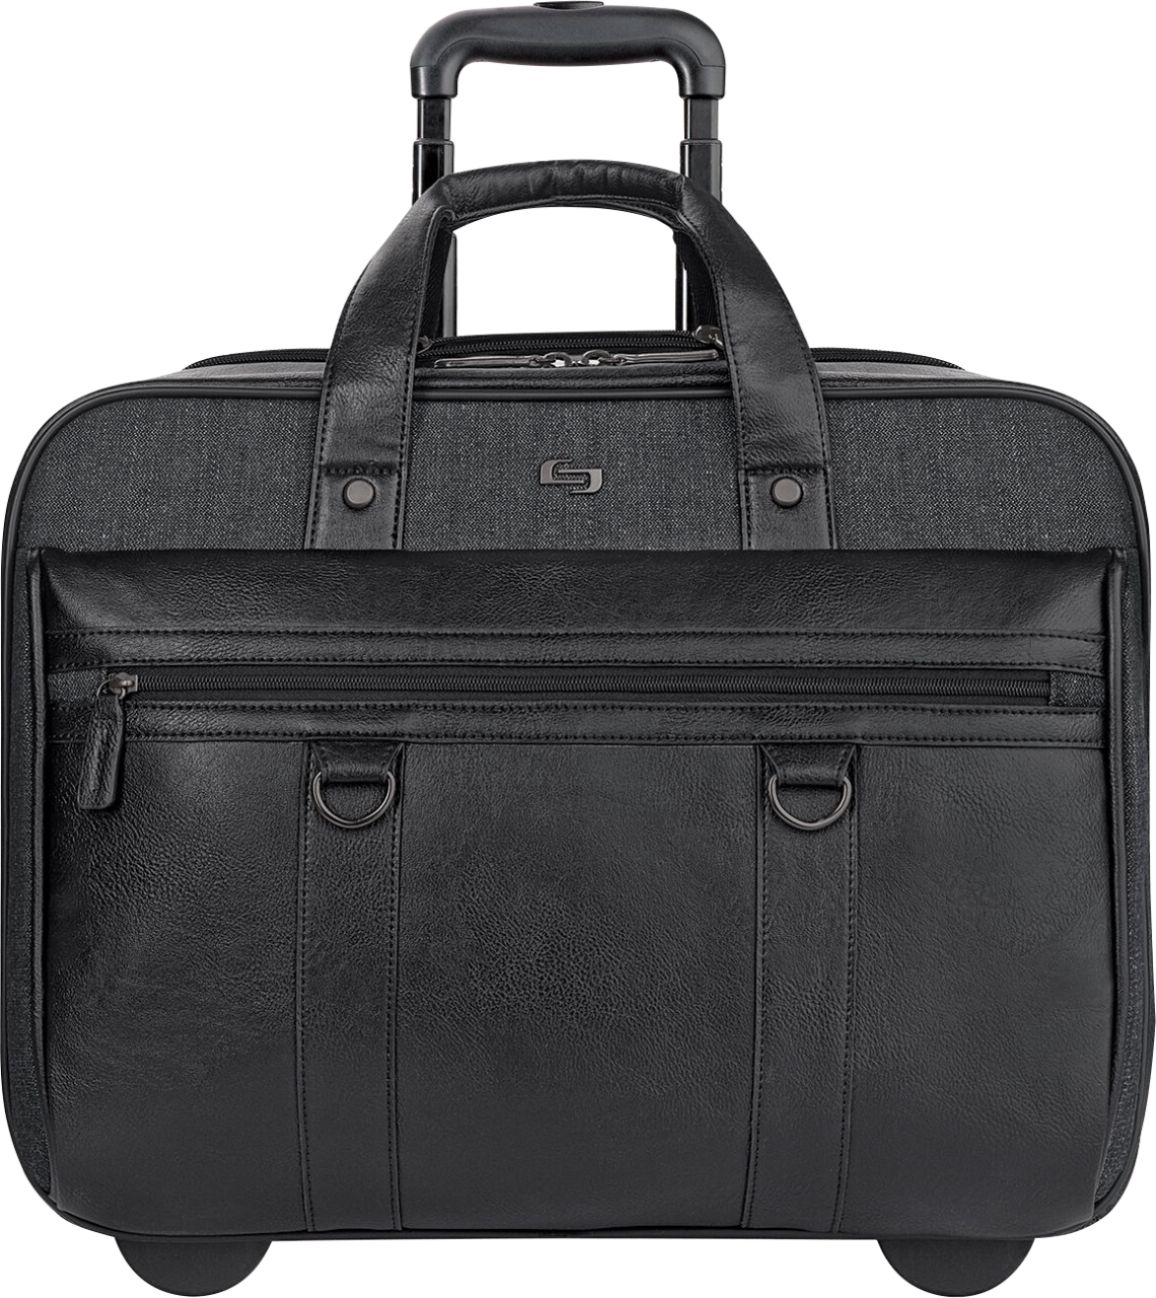 Solo New York - Executive Collection Rolling Laptop Case for 17.3" Laptop - Black